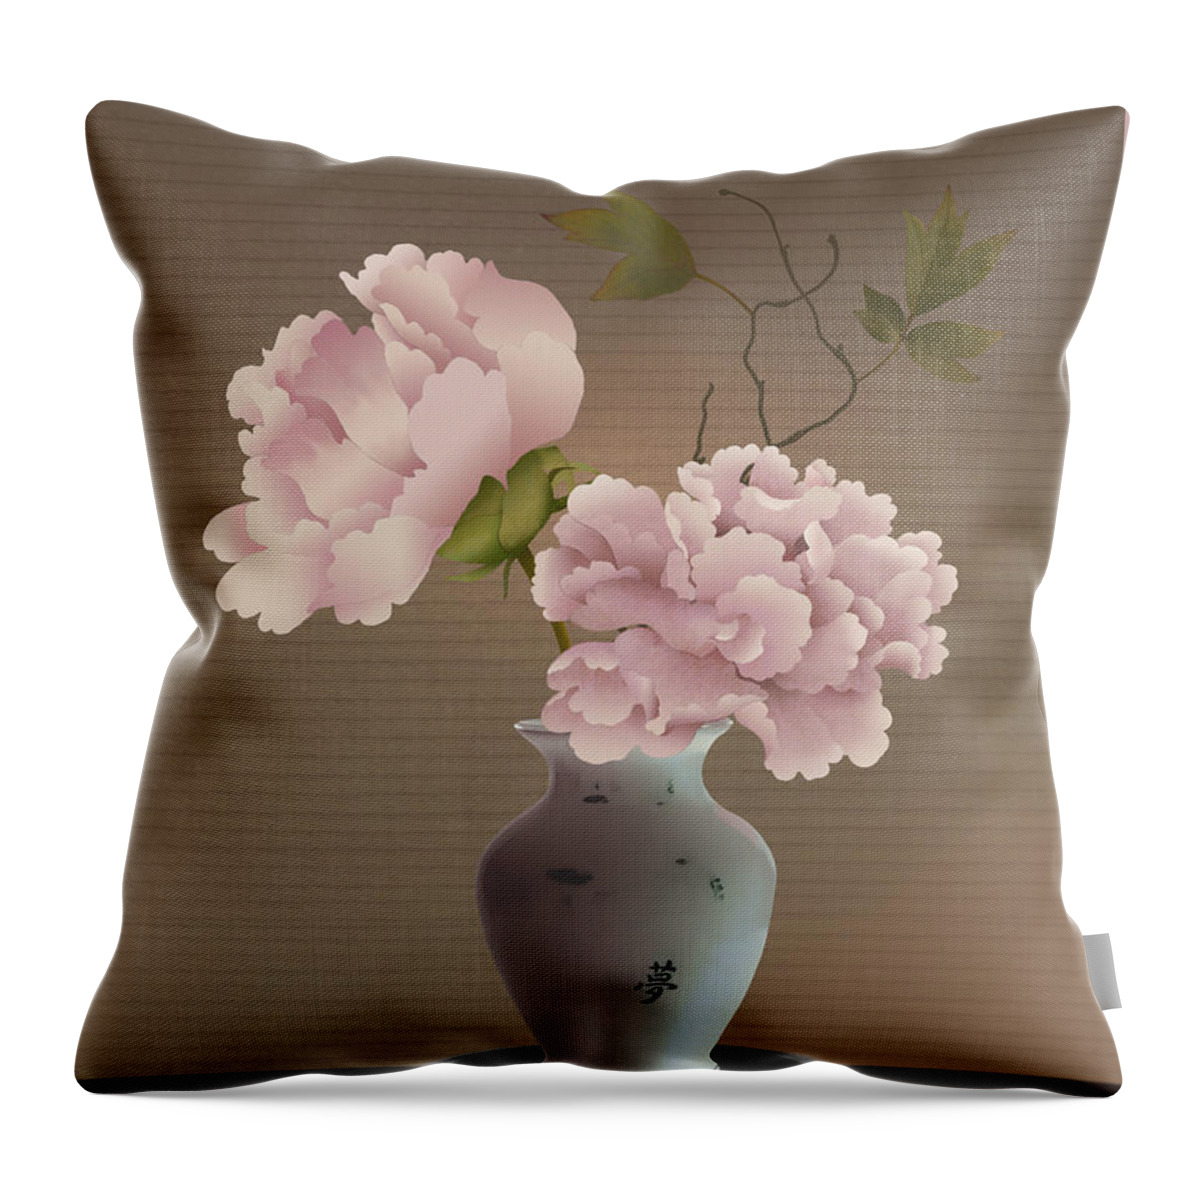 Flowers Throw Pillow featuring the mixed media Chinese Pink Peonies in Vase by M Spadecaller